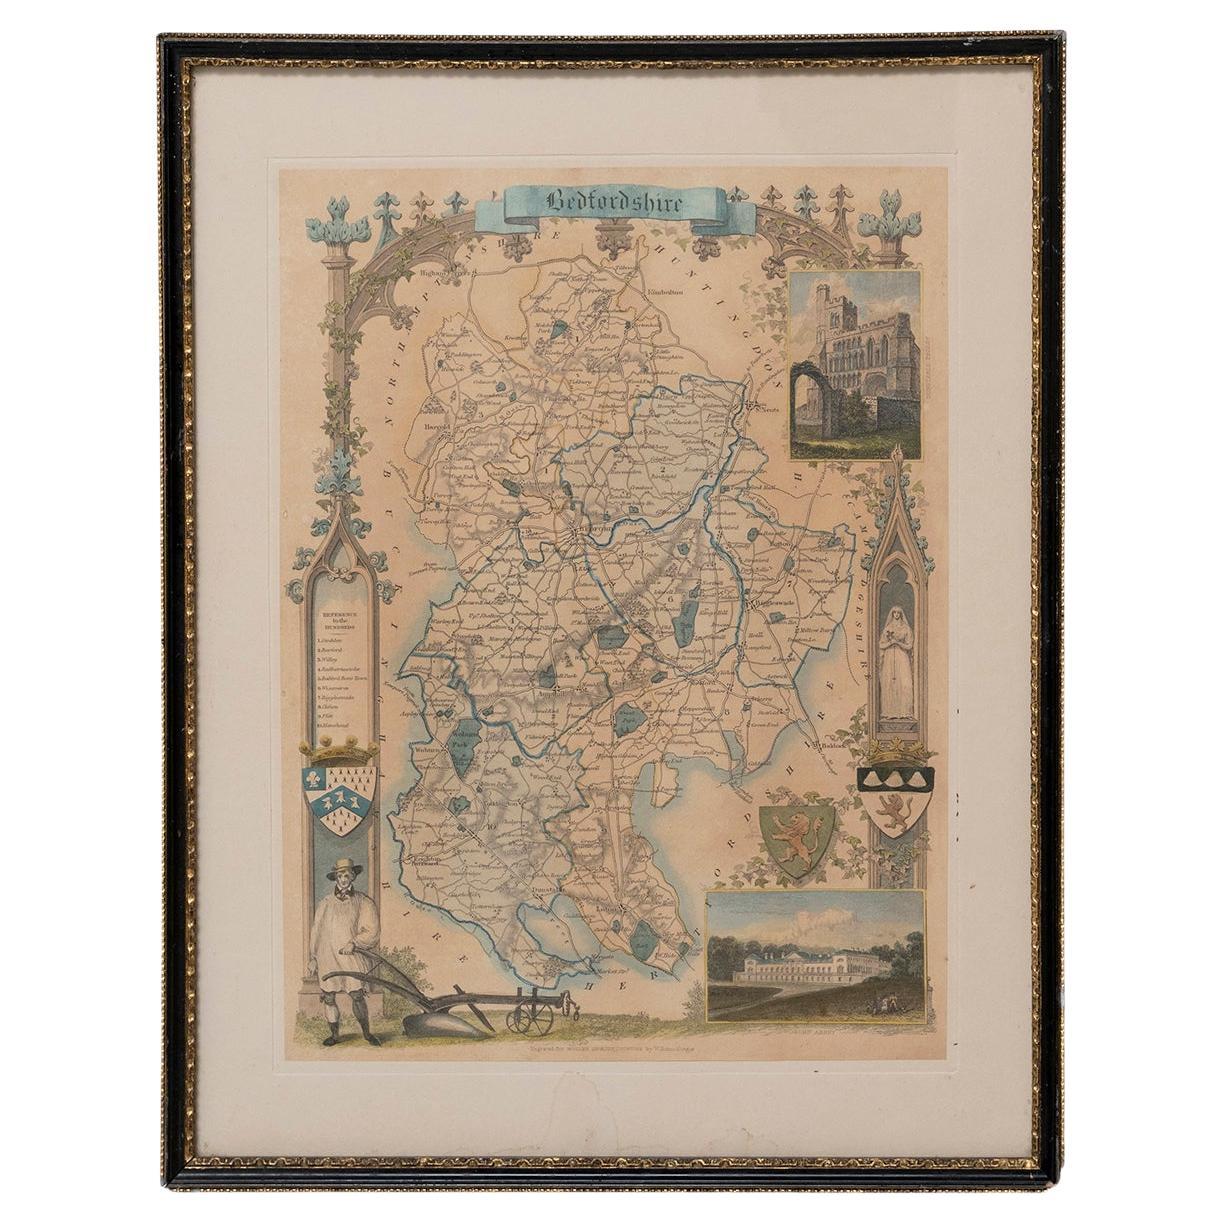 Map Bedfordshire WilliamSchmollinger Dunstable Priory Woburn Abbey Moules Gothic